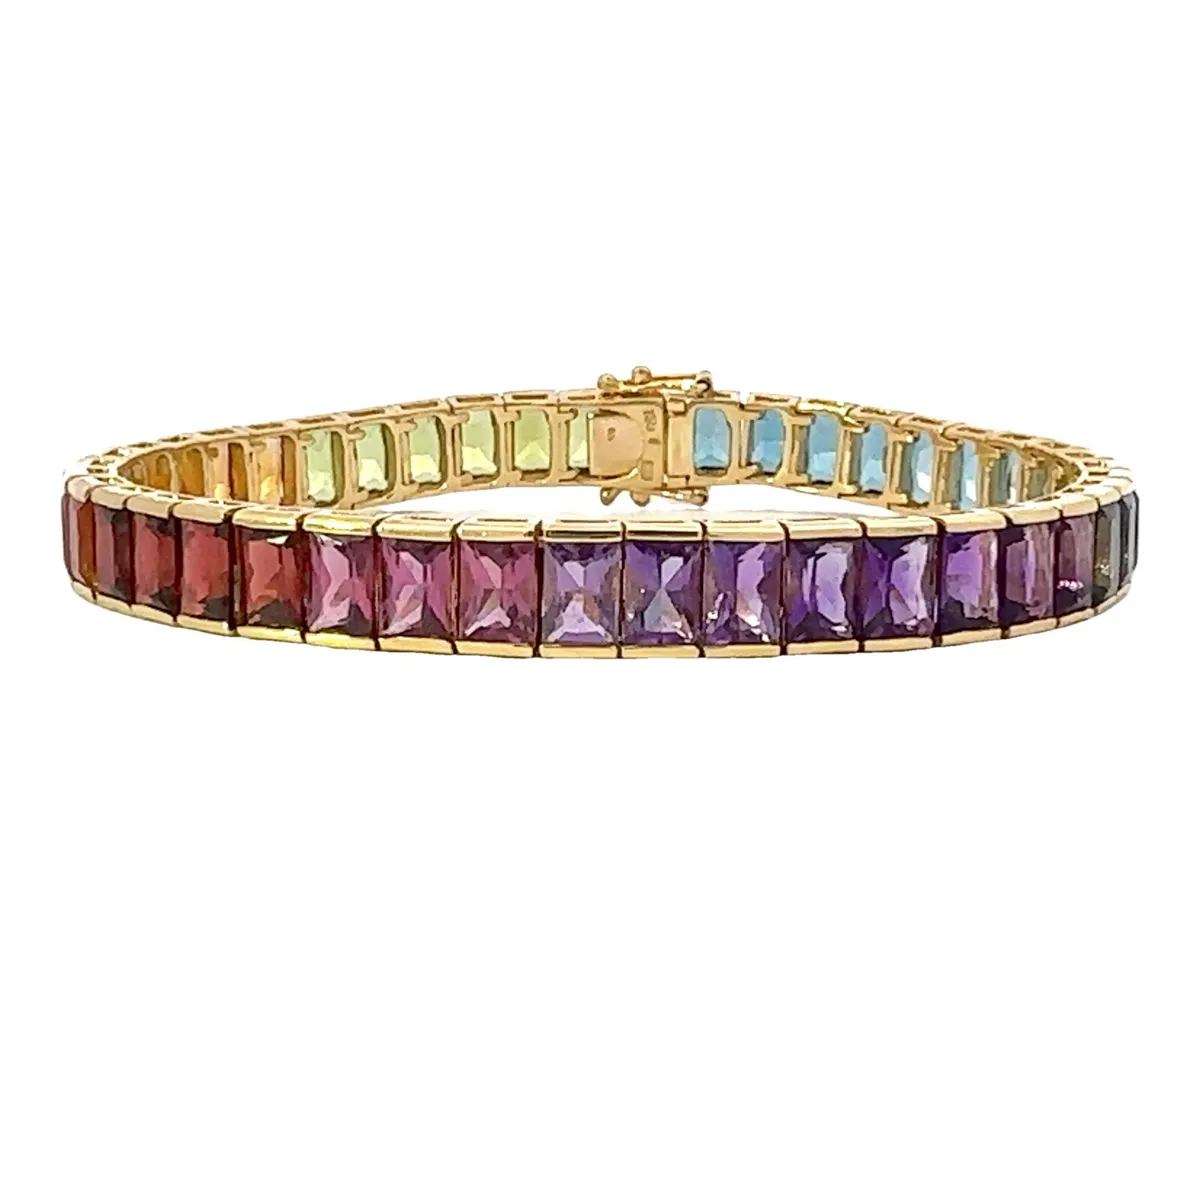 H. Stern Ruby Beads and Diamond Mesh Bracelet in 18k Yellow Gold – 31  Jewels Inc.